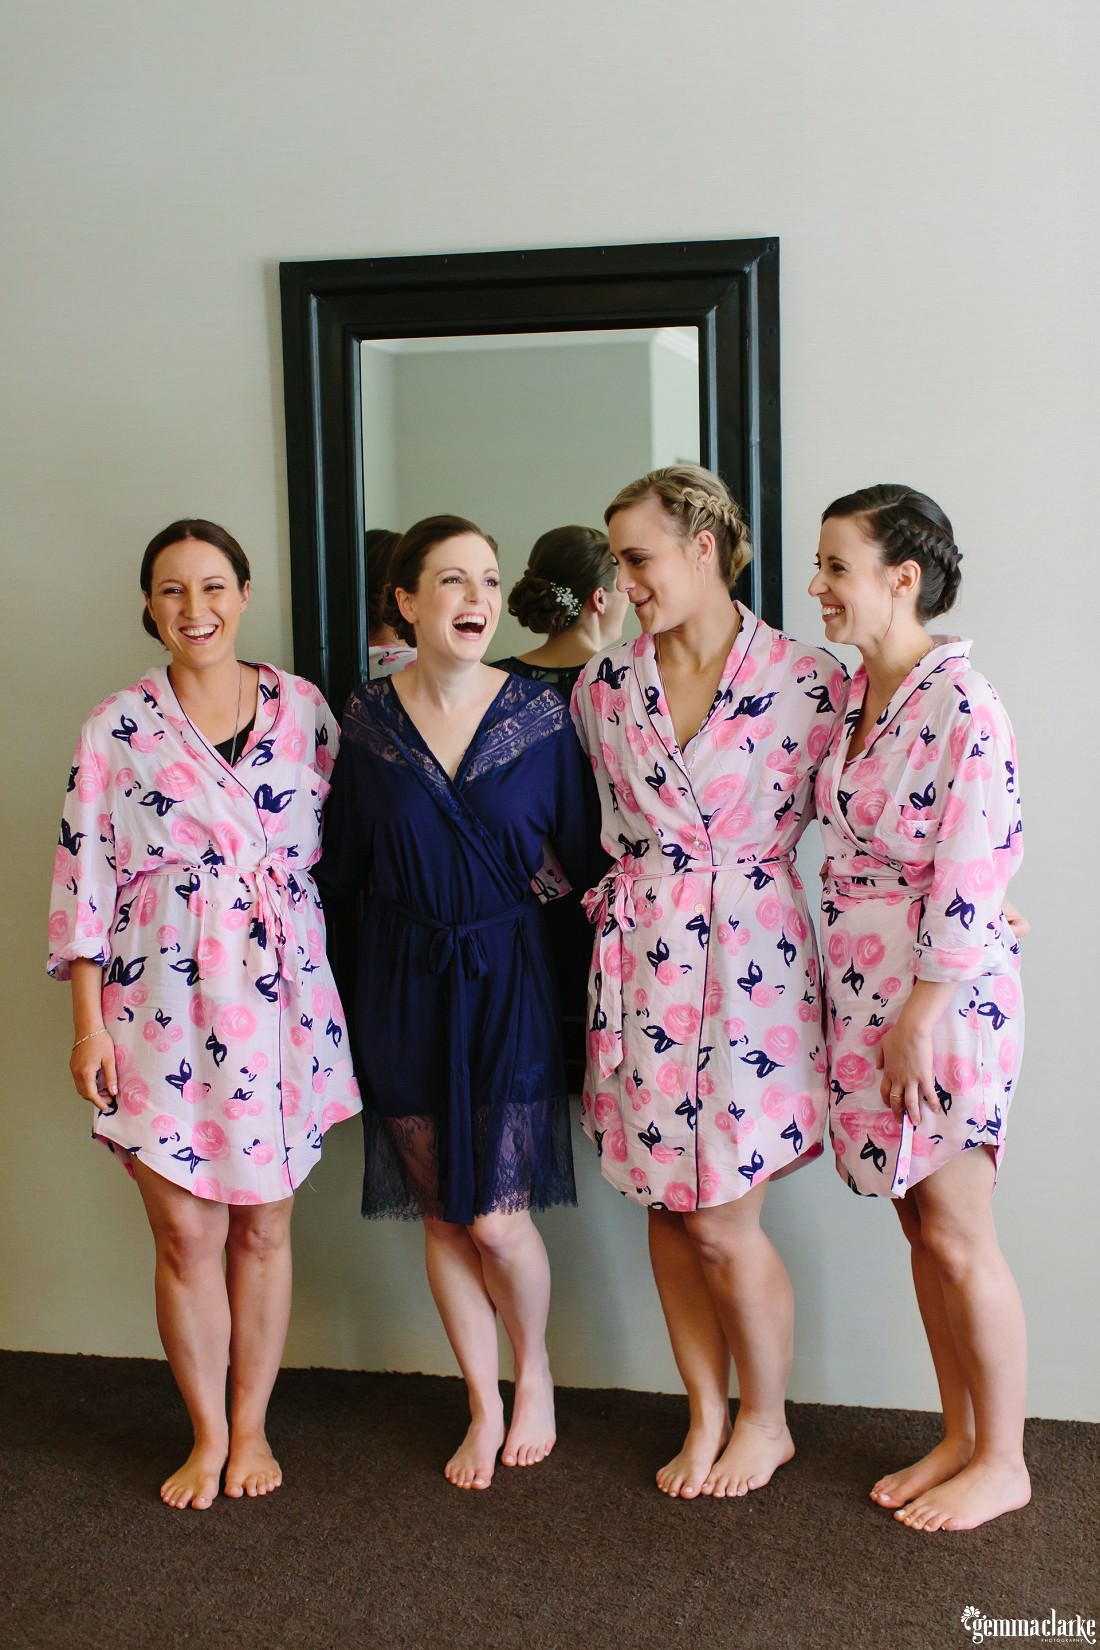 A bride and her bridesmaids in robes, smiling in front of a mirror